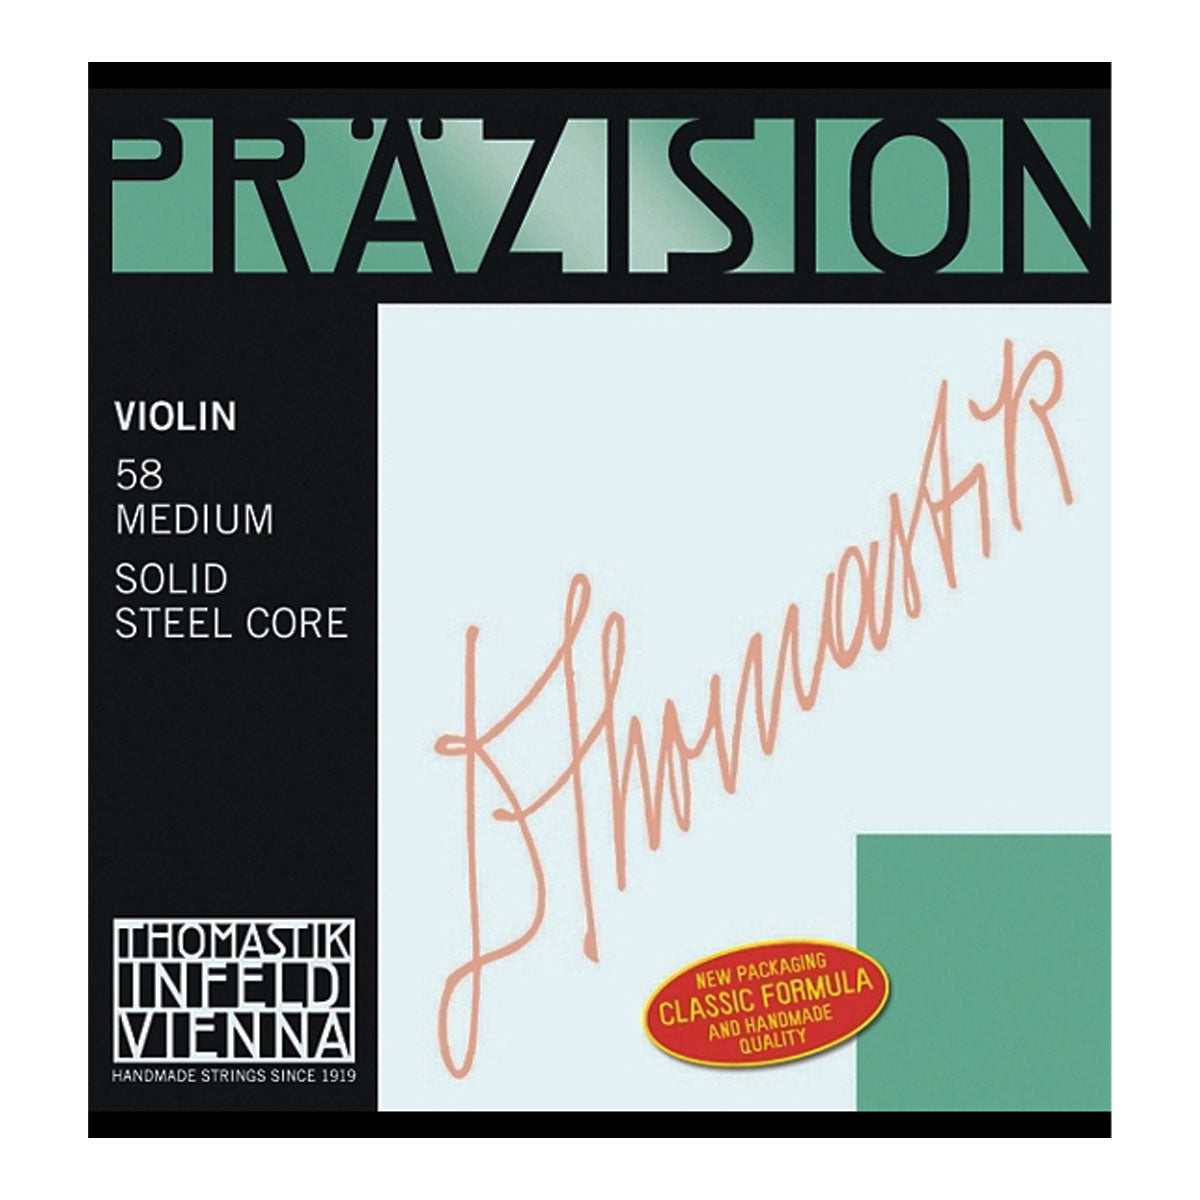 Prazision Violin Strings, Thomastik Infeld, Austria, full size, 4/4, 3/4, 1/2, 1/4, 1/8, 1/16, hand-picked and inspected by Violins and such, with TEO musical Instruments, London Ontario Canada